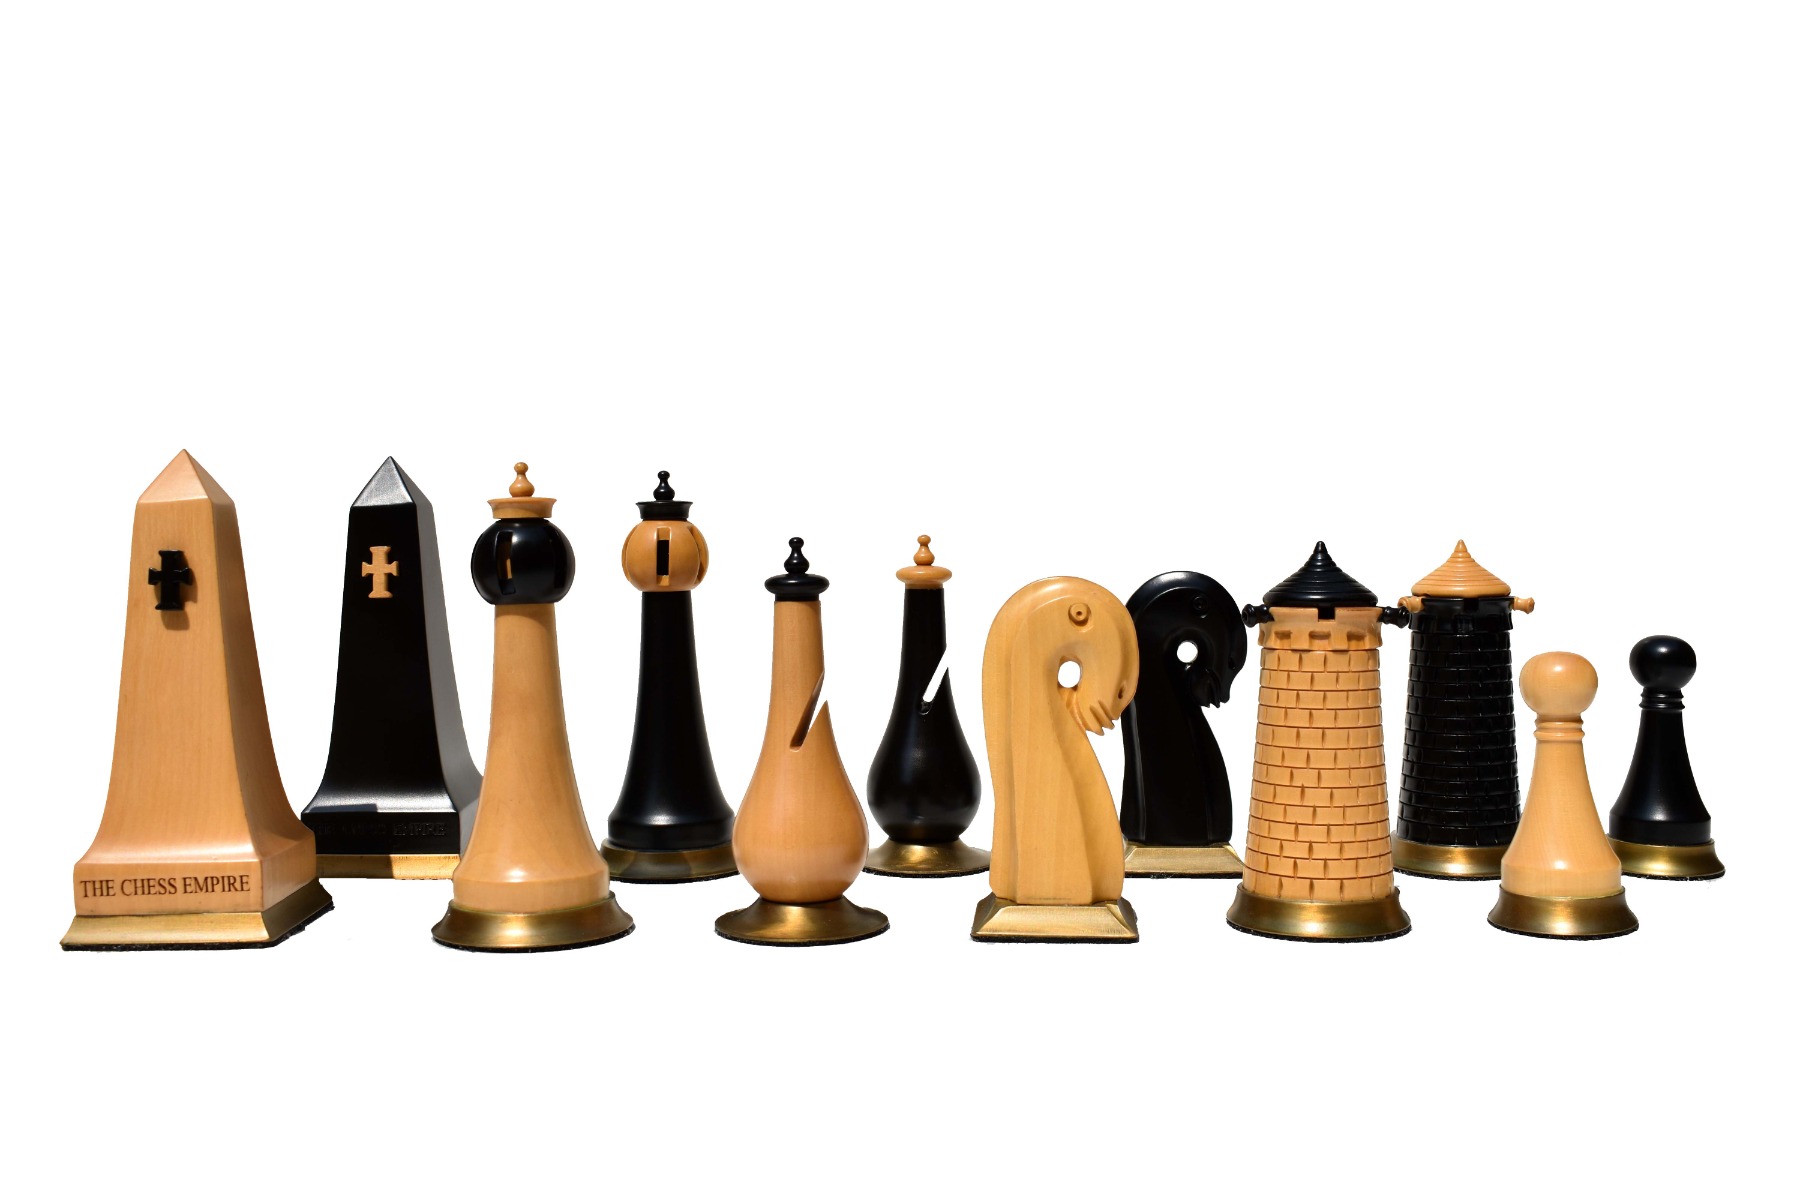 32 Pcs Wooden International Chess Pieces With No Board, Board Game Set(h-4)